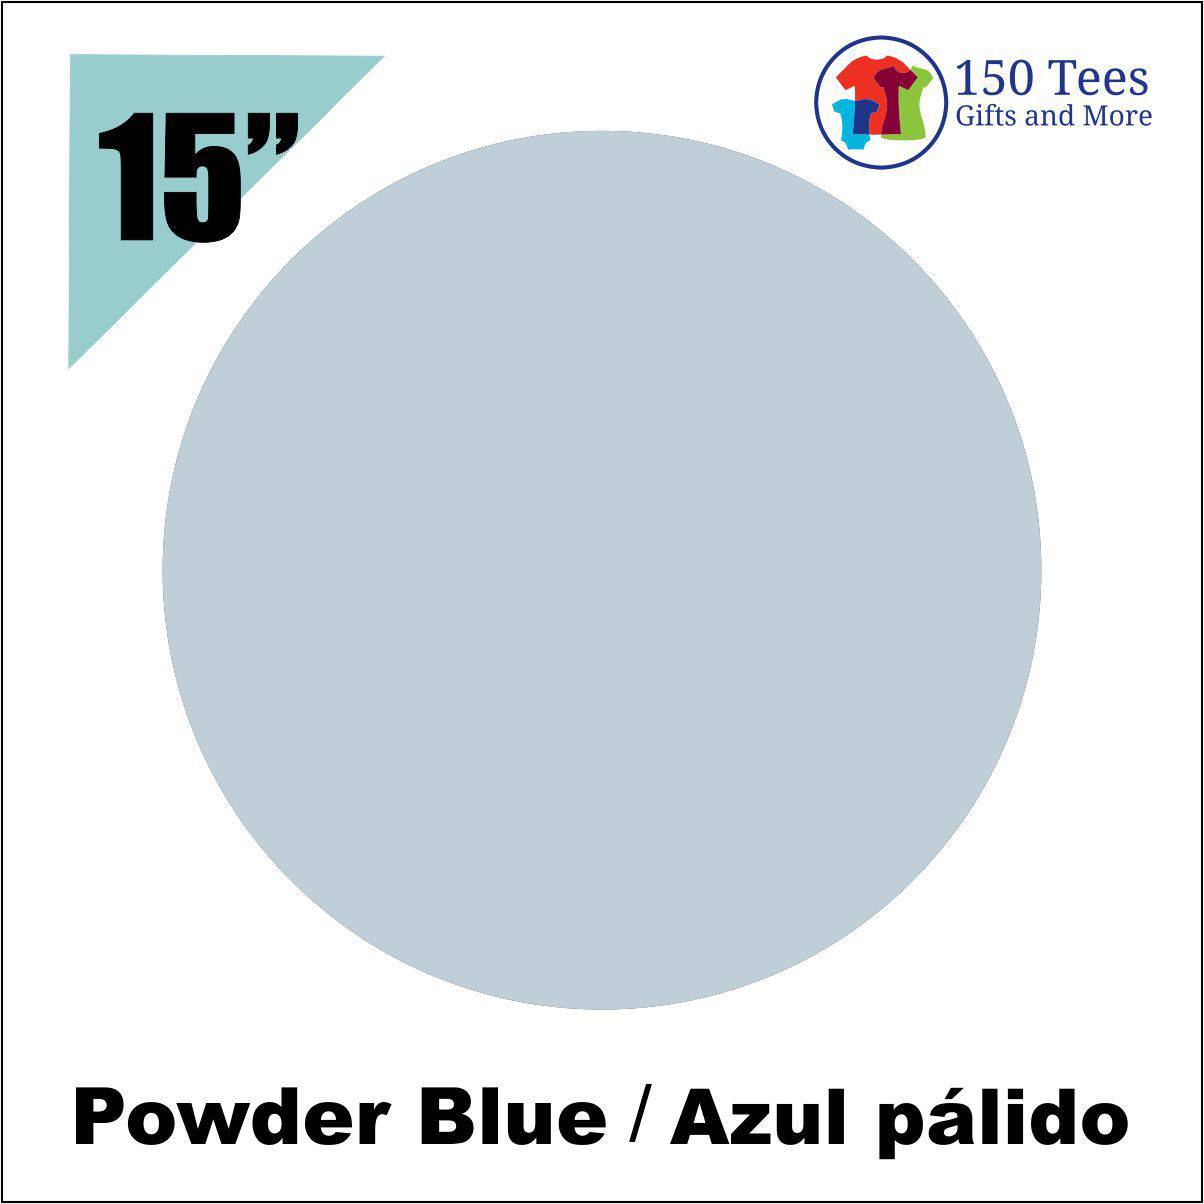 EasyWeed HTV 15" - Powder Blue - 150 TEES GIFTS & MORE